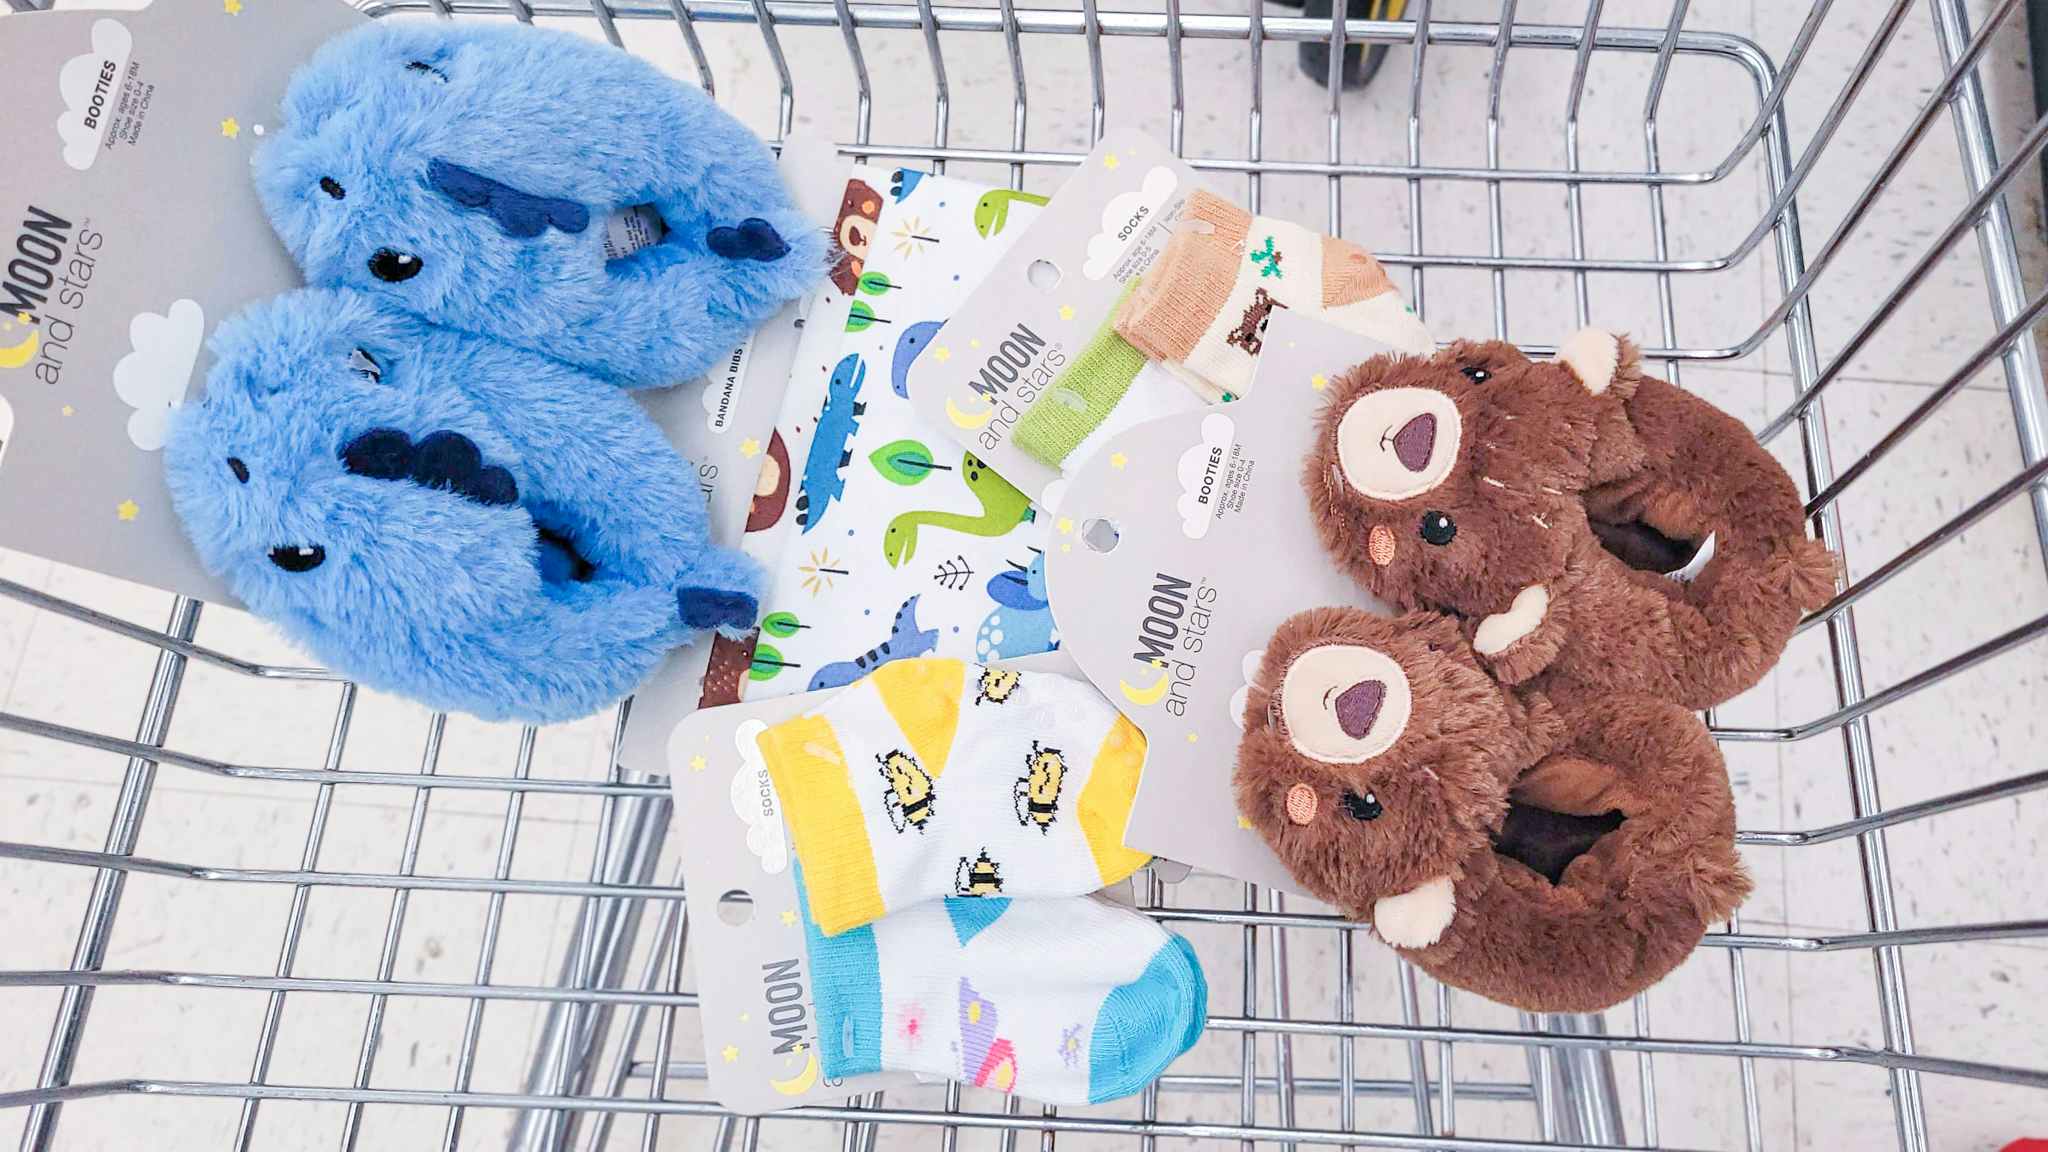 baby booties, baby socks, and baby scarves in shopping basket